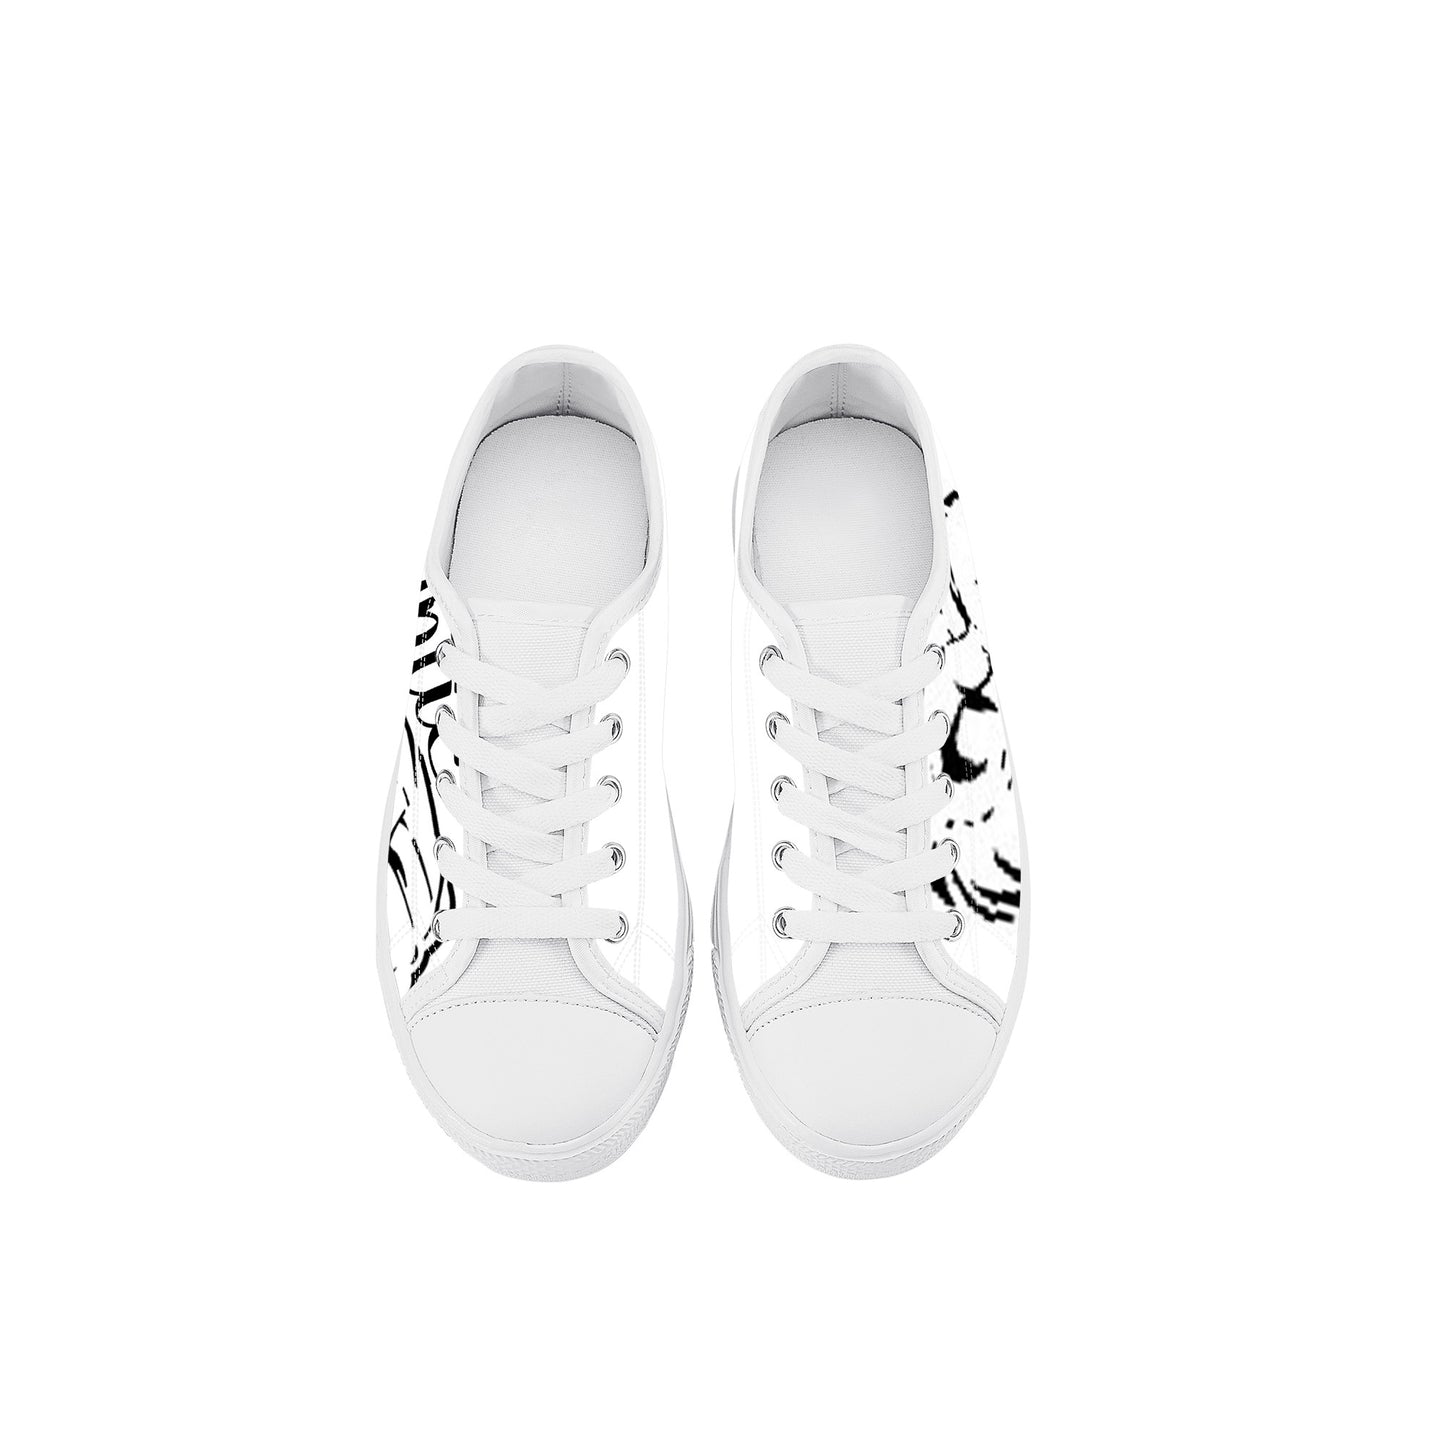 Cryptic Kids Low Top Canvas Shoes, White